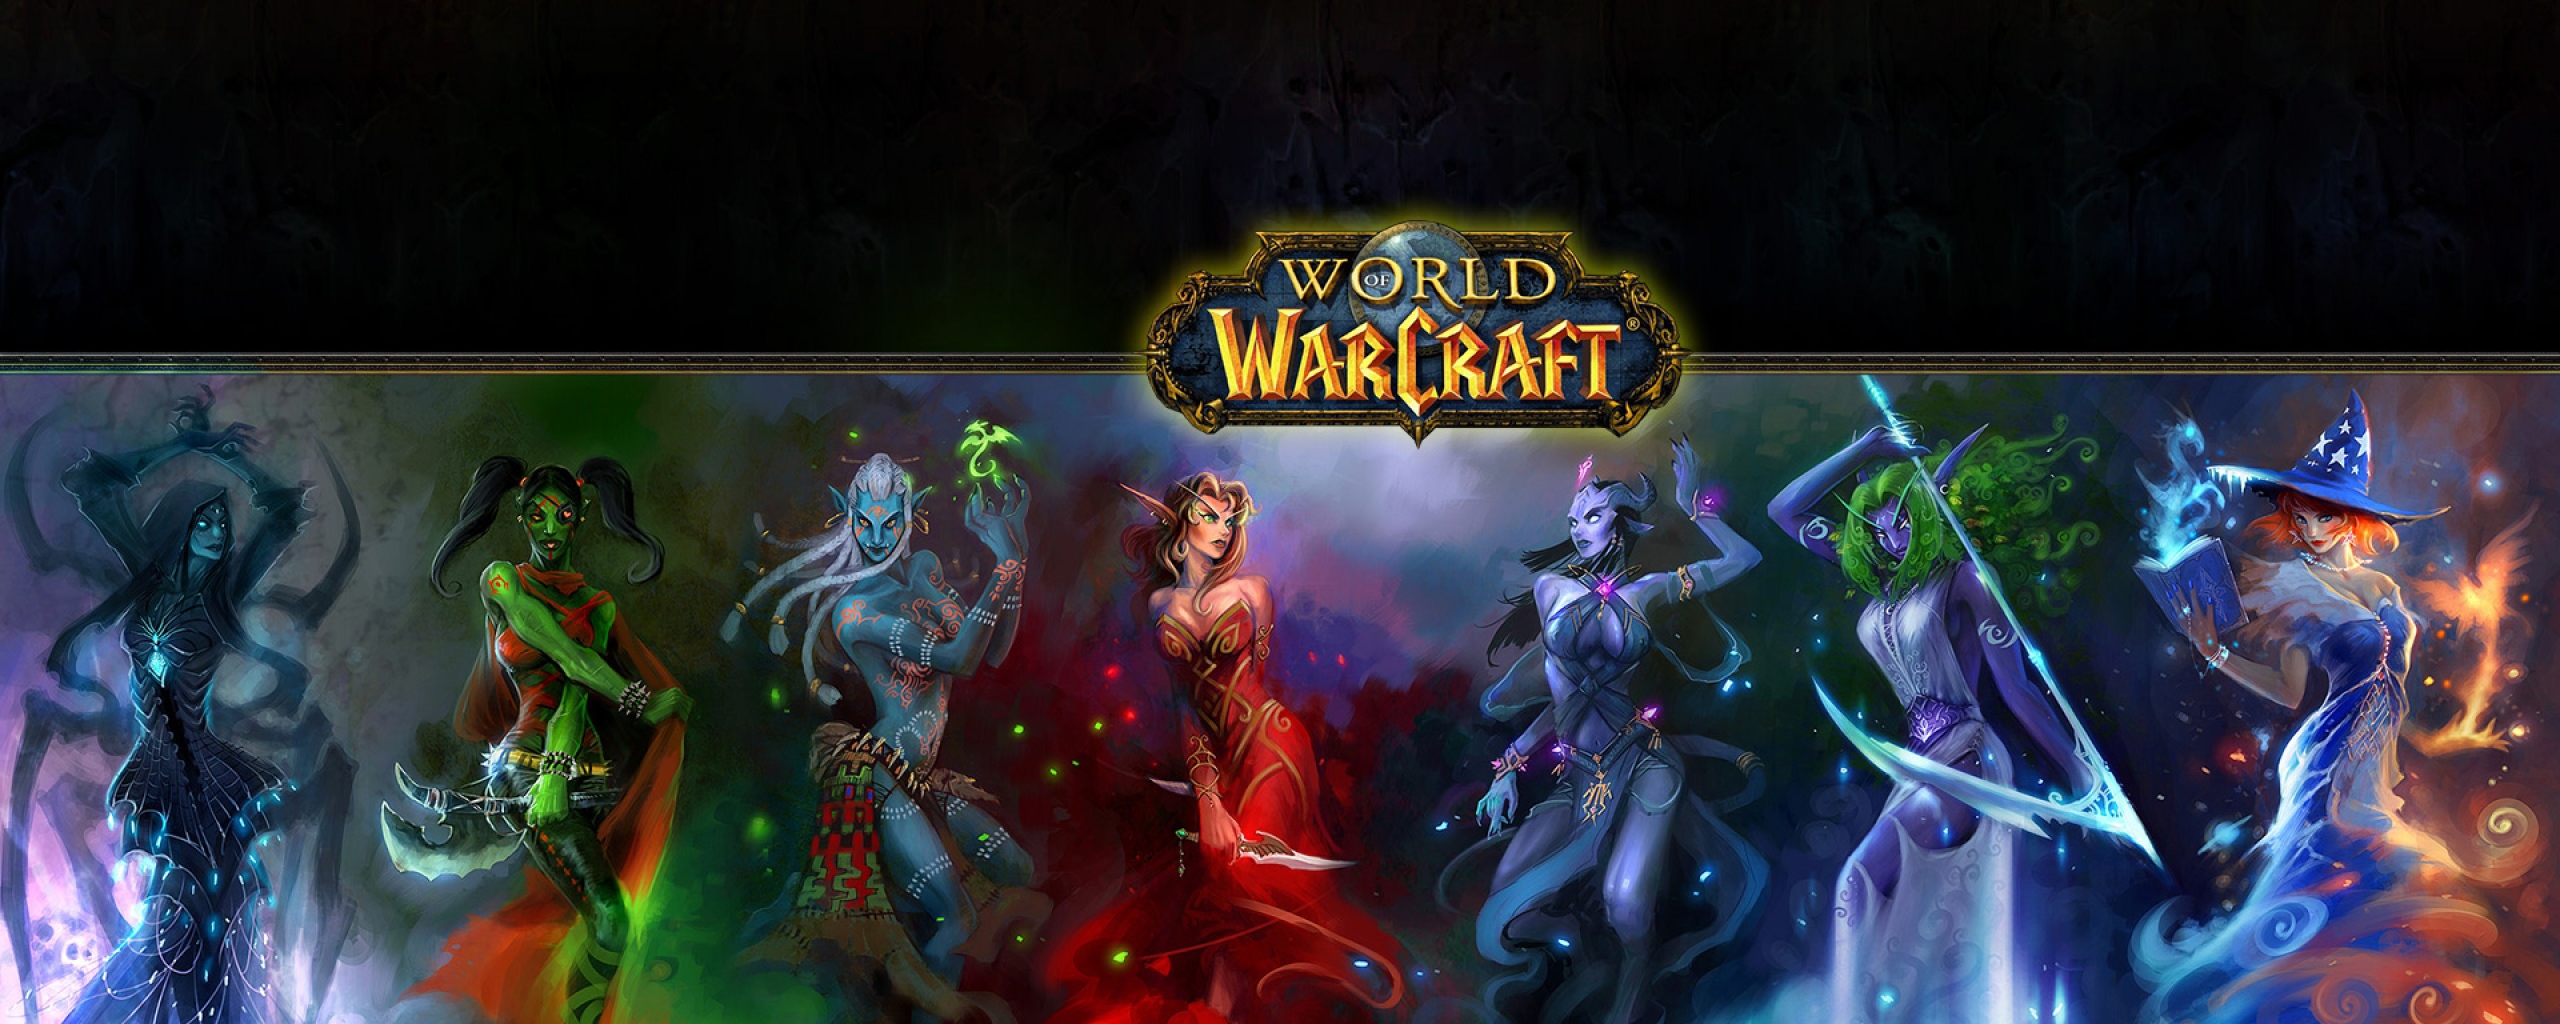 Download Wallpaper 2560x1024 World of warcraft, Characters, Faces